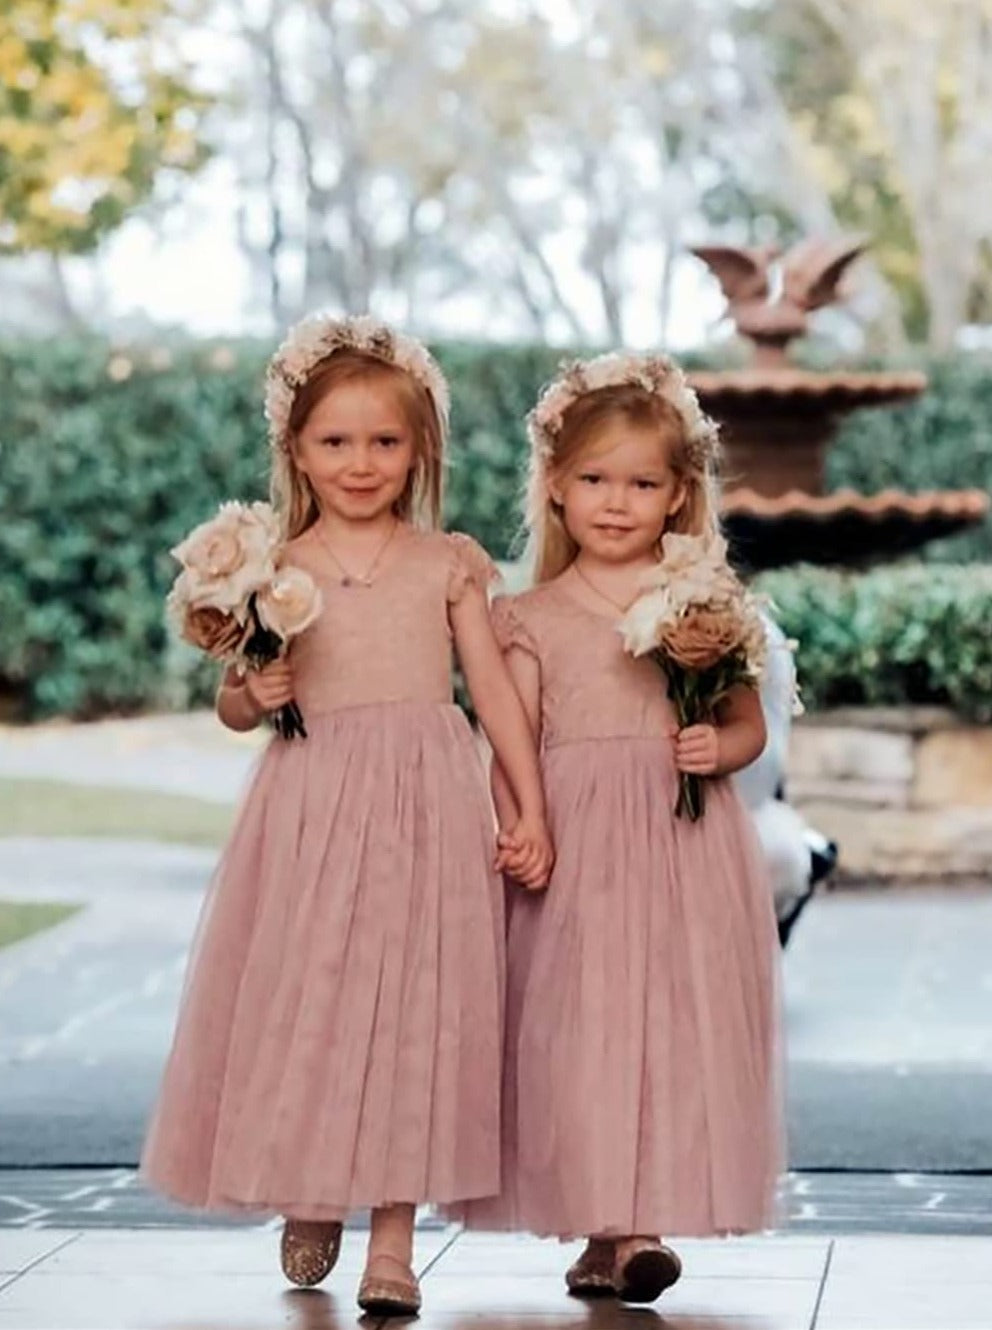 2Bunnies Flower Girl Dress Paisley Lace Back A-Line Short Sleeve Straight Tulle Maxi (Dusty Pink) - 2BUNNIES